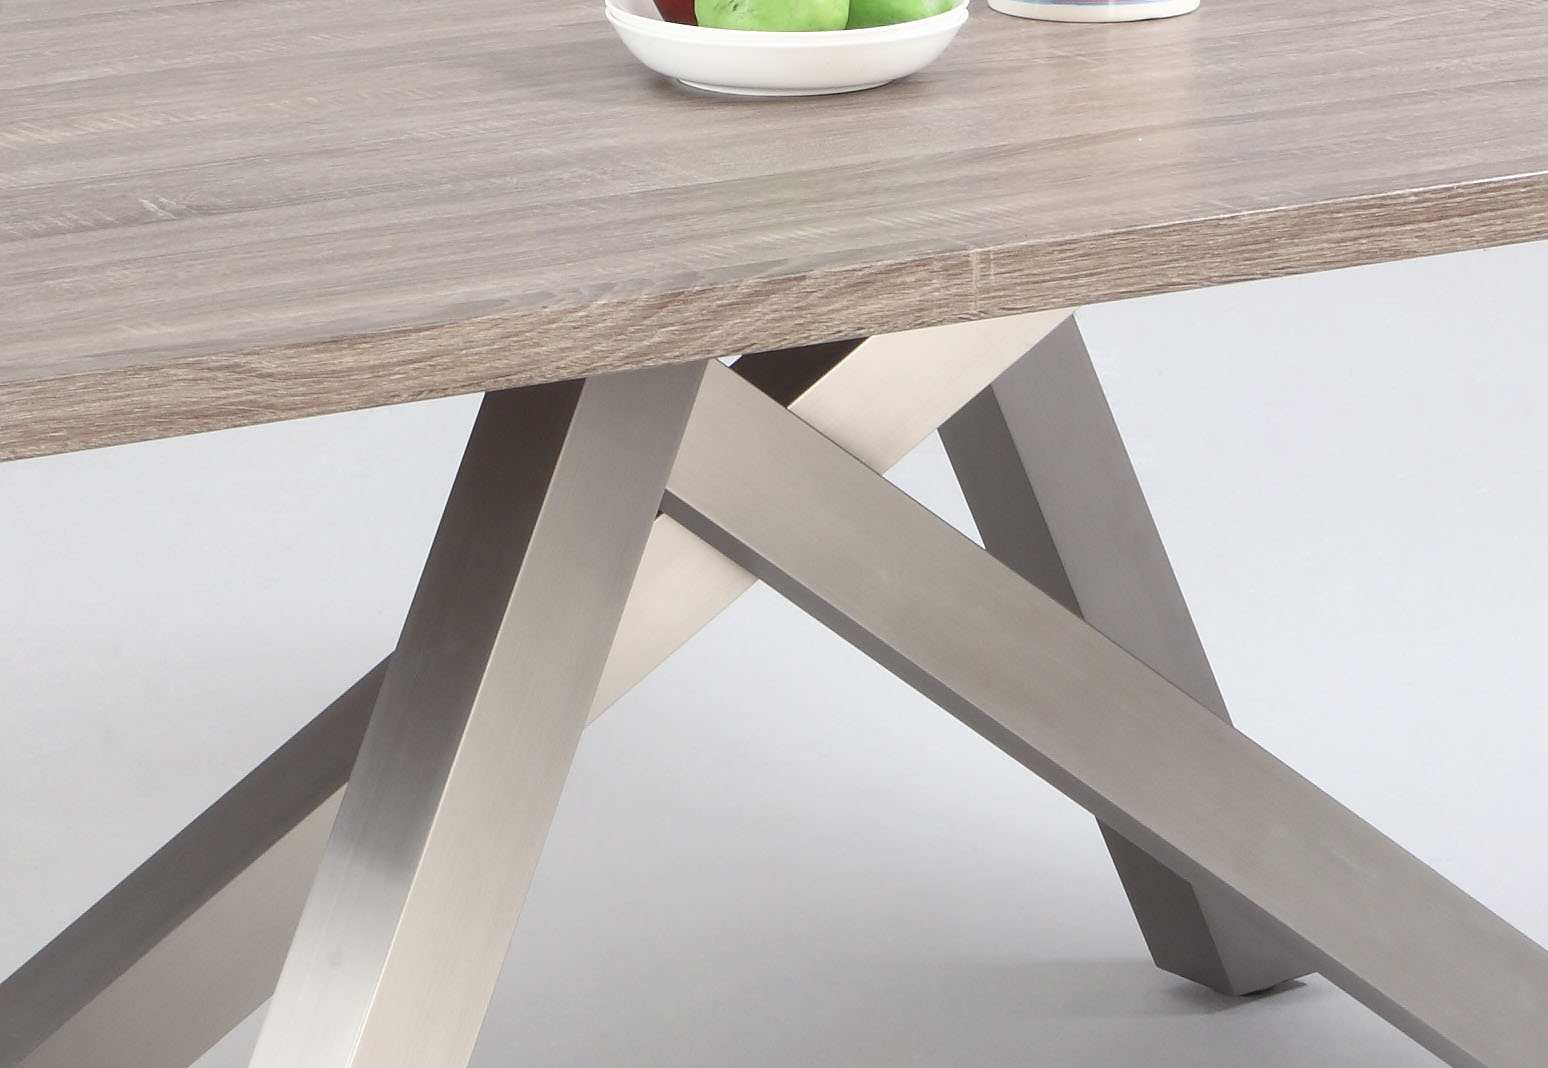 Dark Oak Dining Table with Stainless Steel Legs